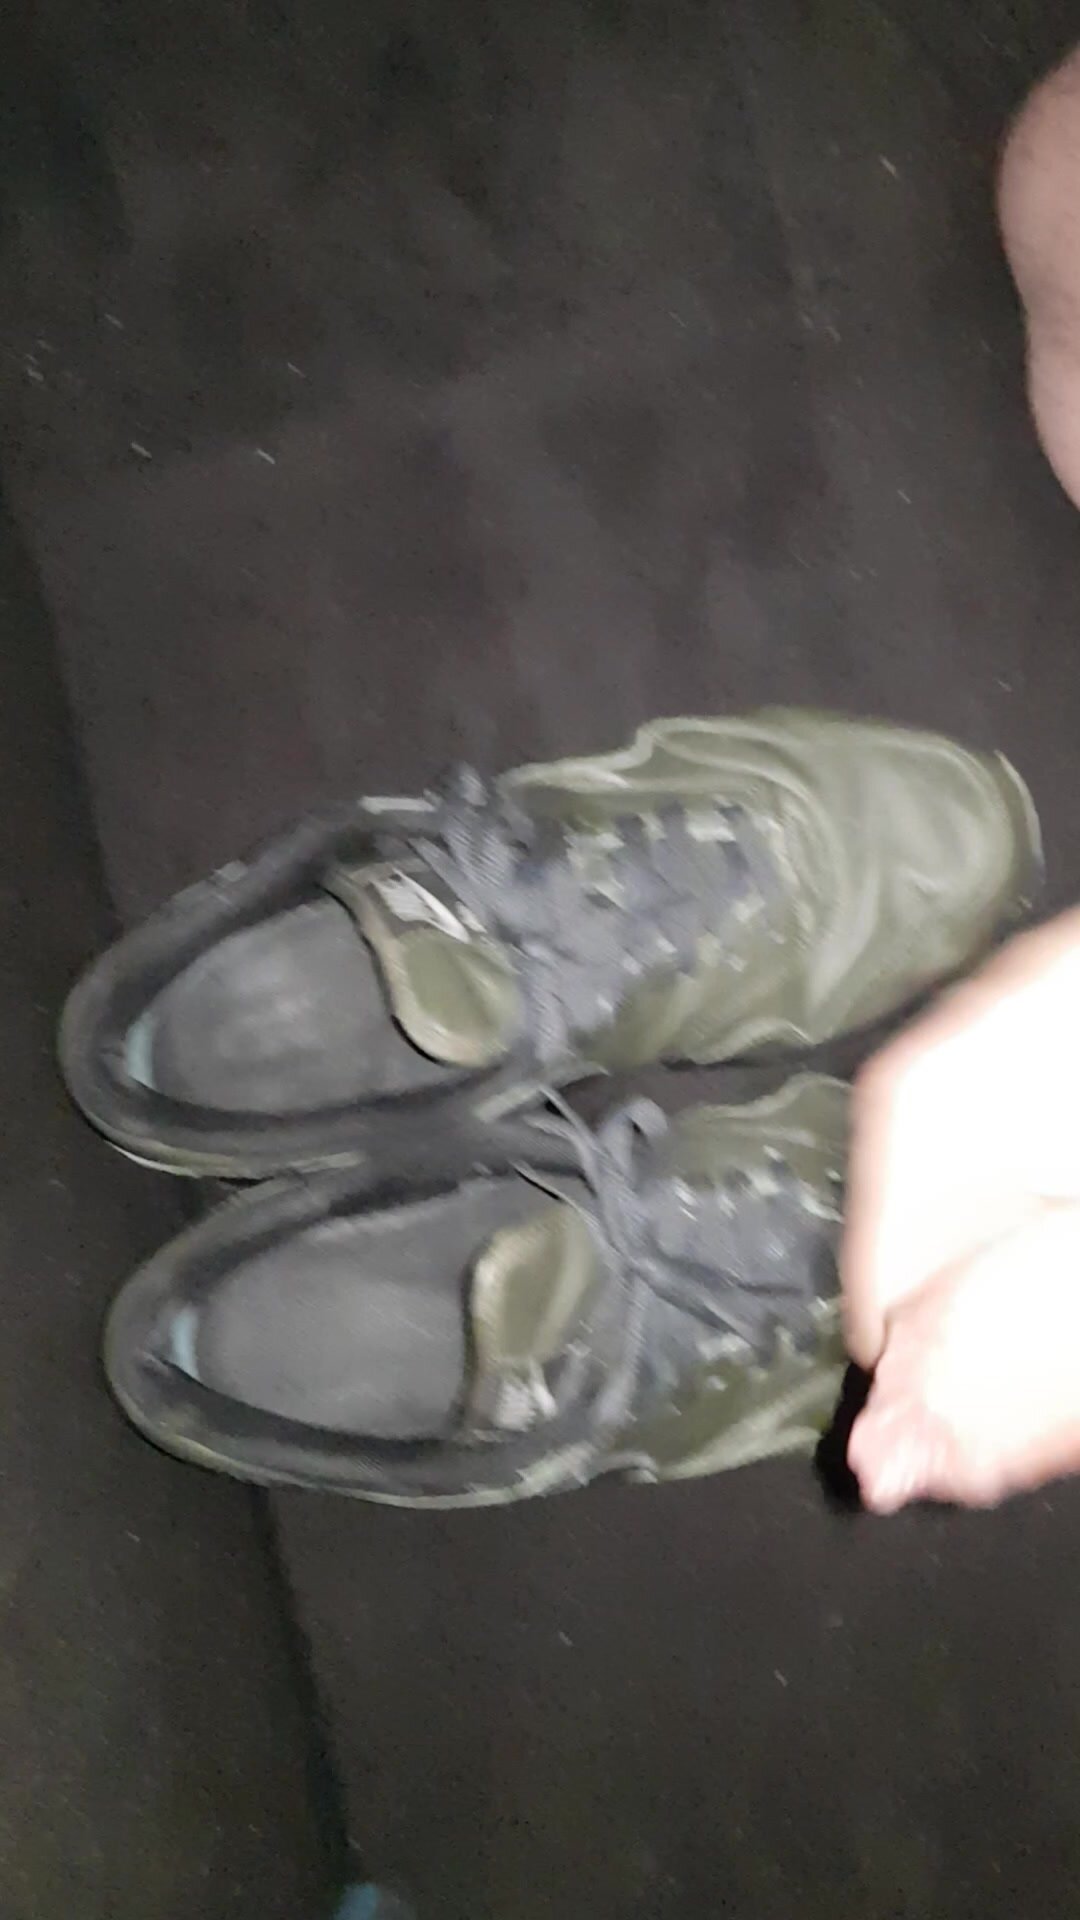 Covering Air Max 1s ID with cum